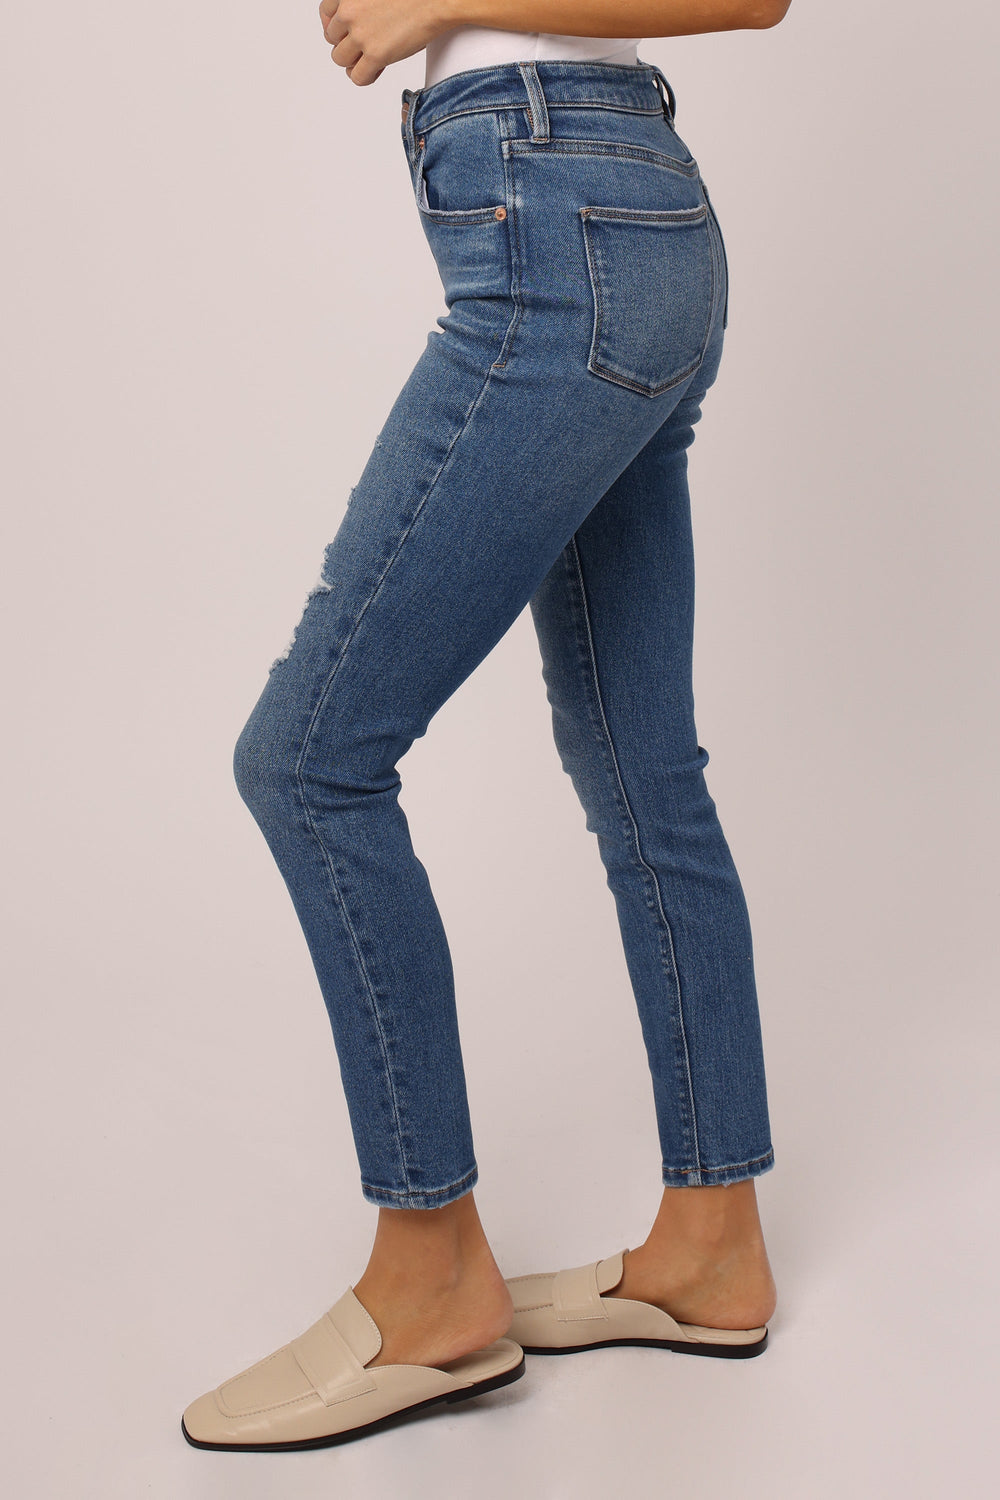 image of a female model wearing a OLIVIA SUPER HIGH RISE ANKLE SKINNY JEANS PATAGONIA JEANS